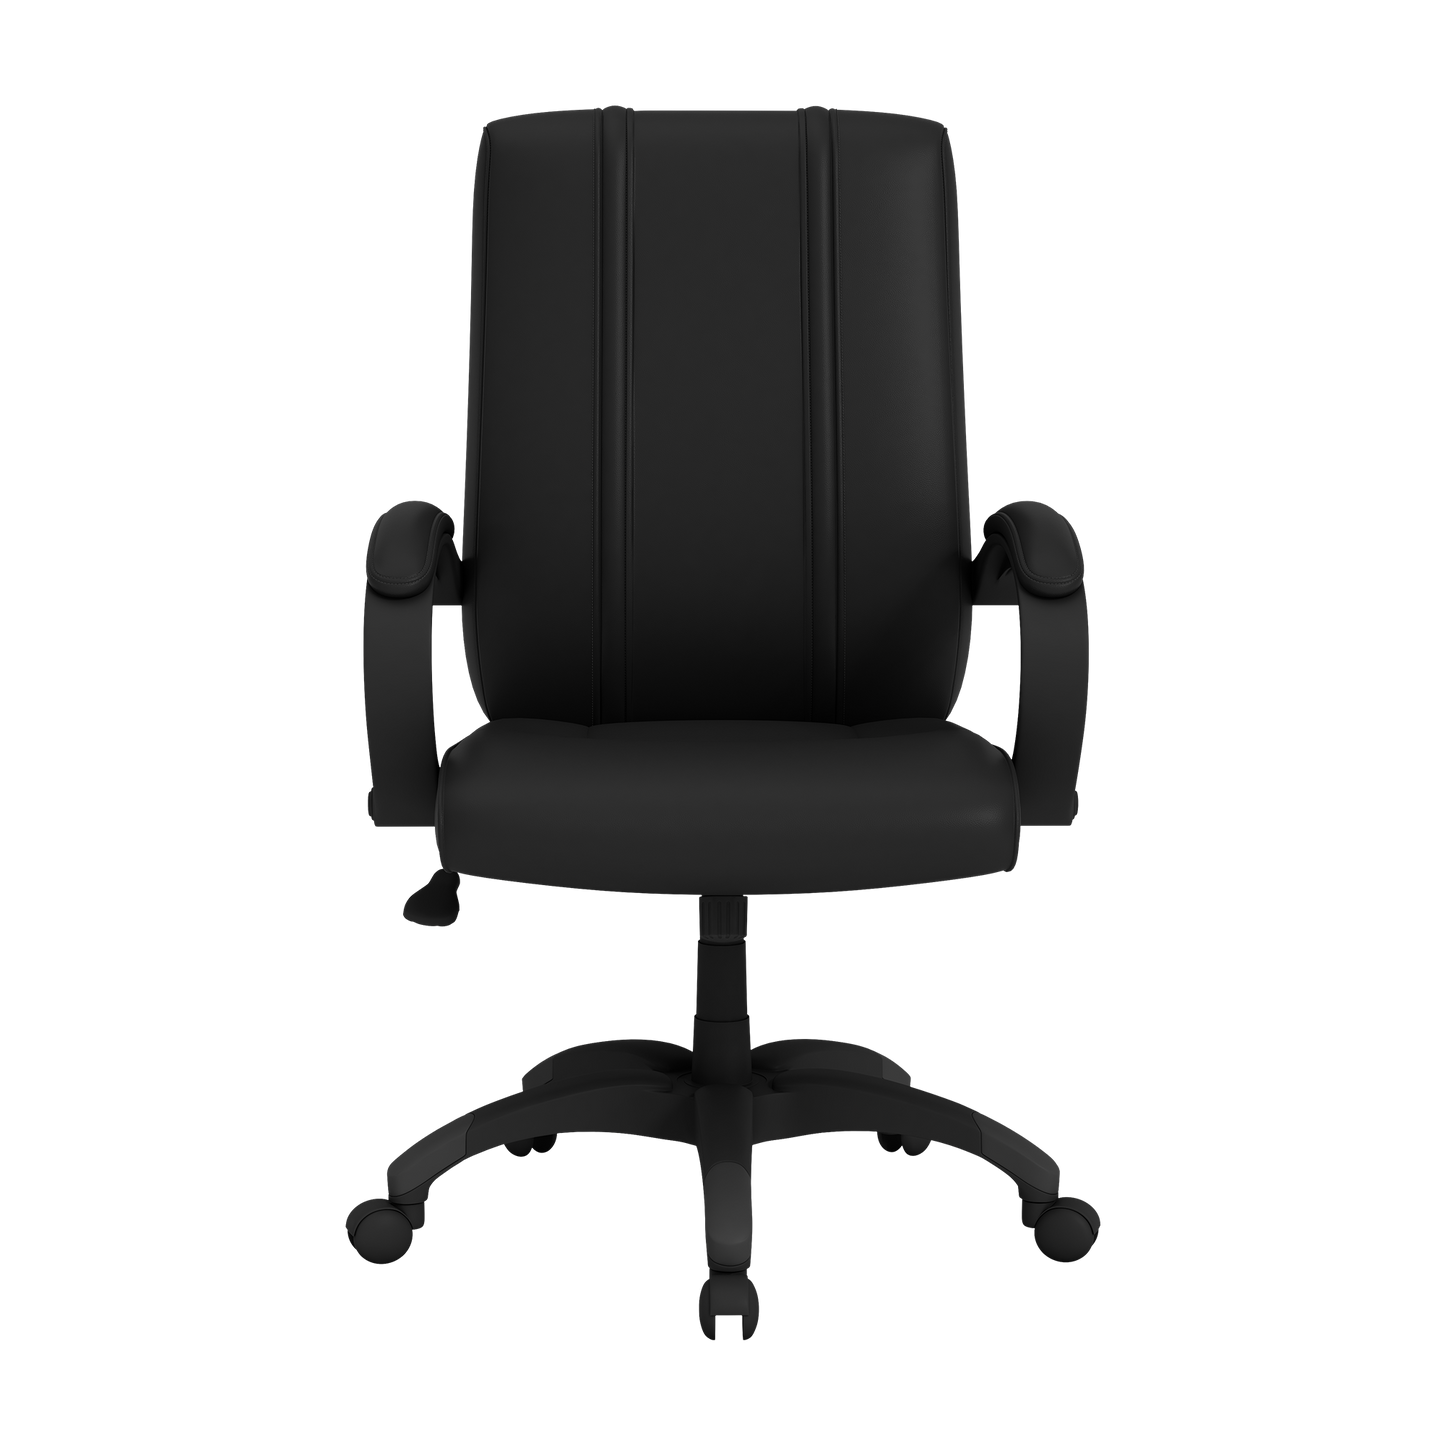 Office Chair 1000 with Kansas State Wildcats Logo